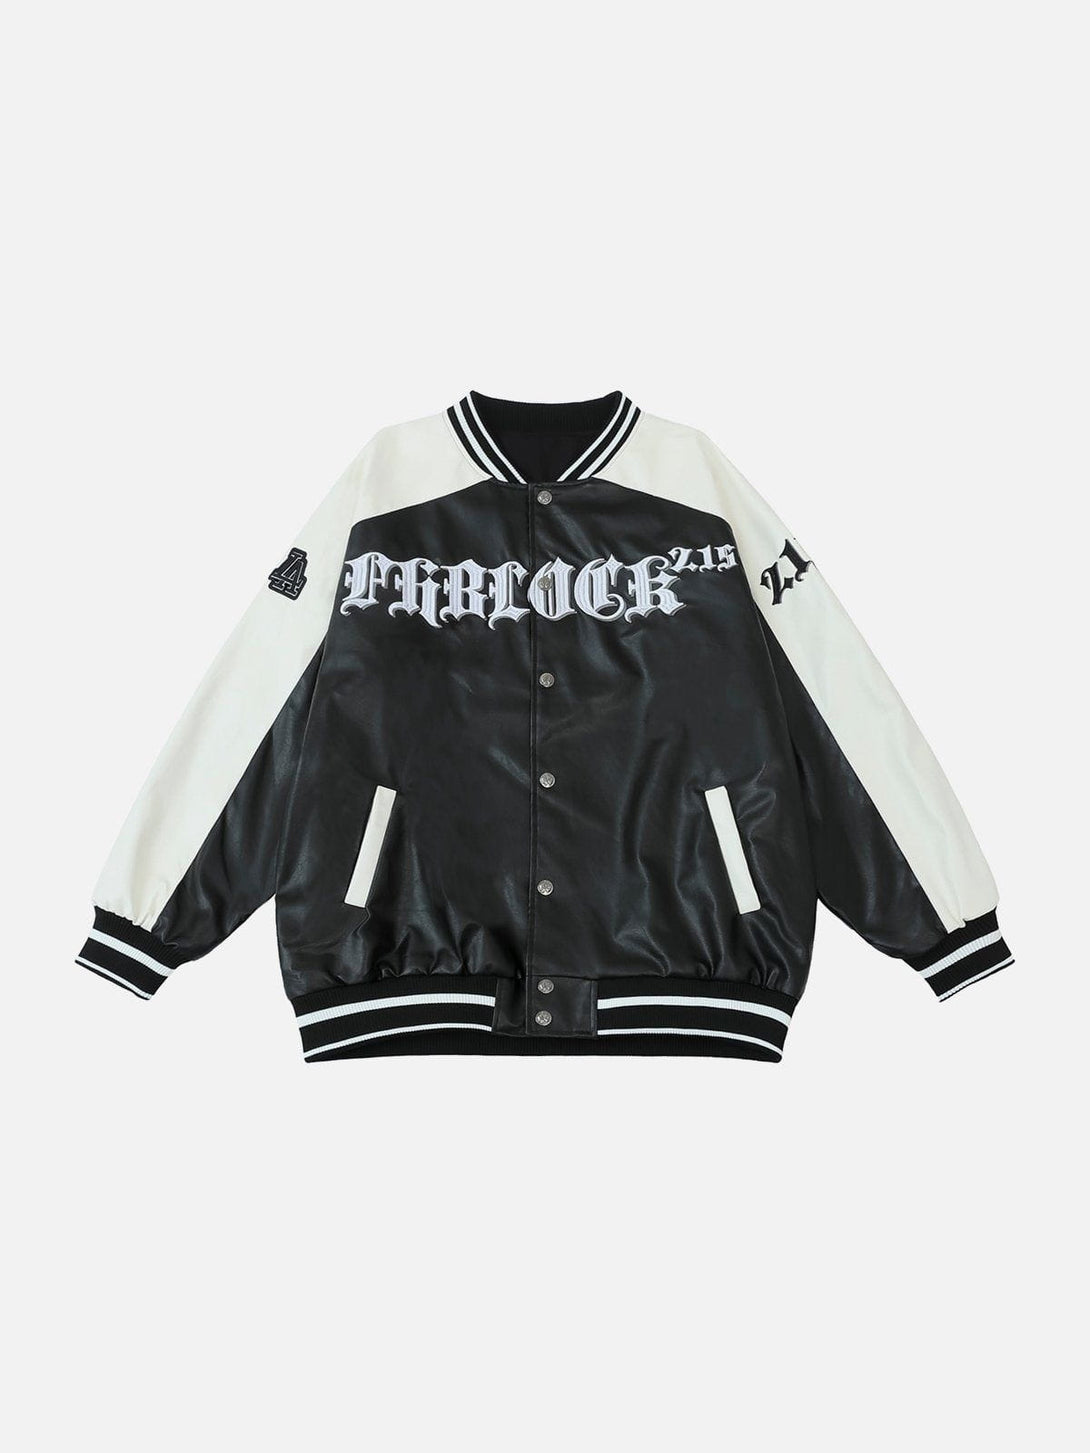 Levefly - Embroidered Colorblock Leather Jacket - Streetwear Fashion - levefly.com